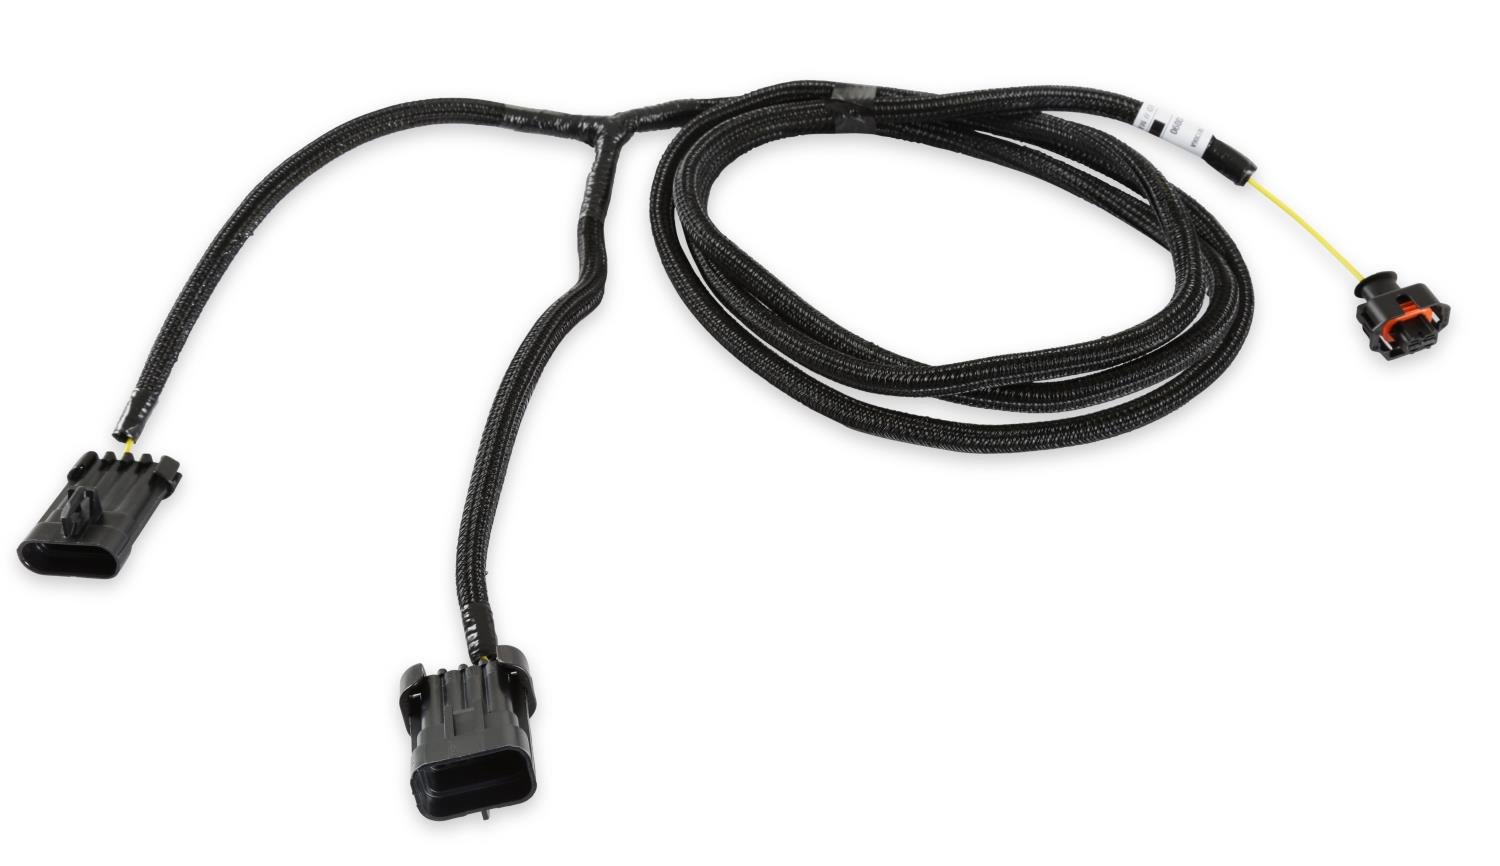 Wiring Harness for Ford Pulse Width Modulation (PWM) Alternators